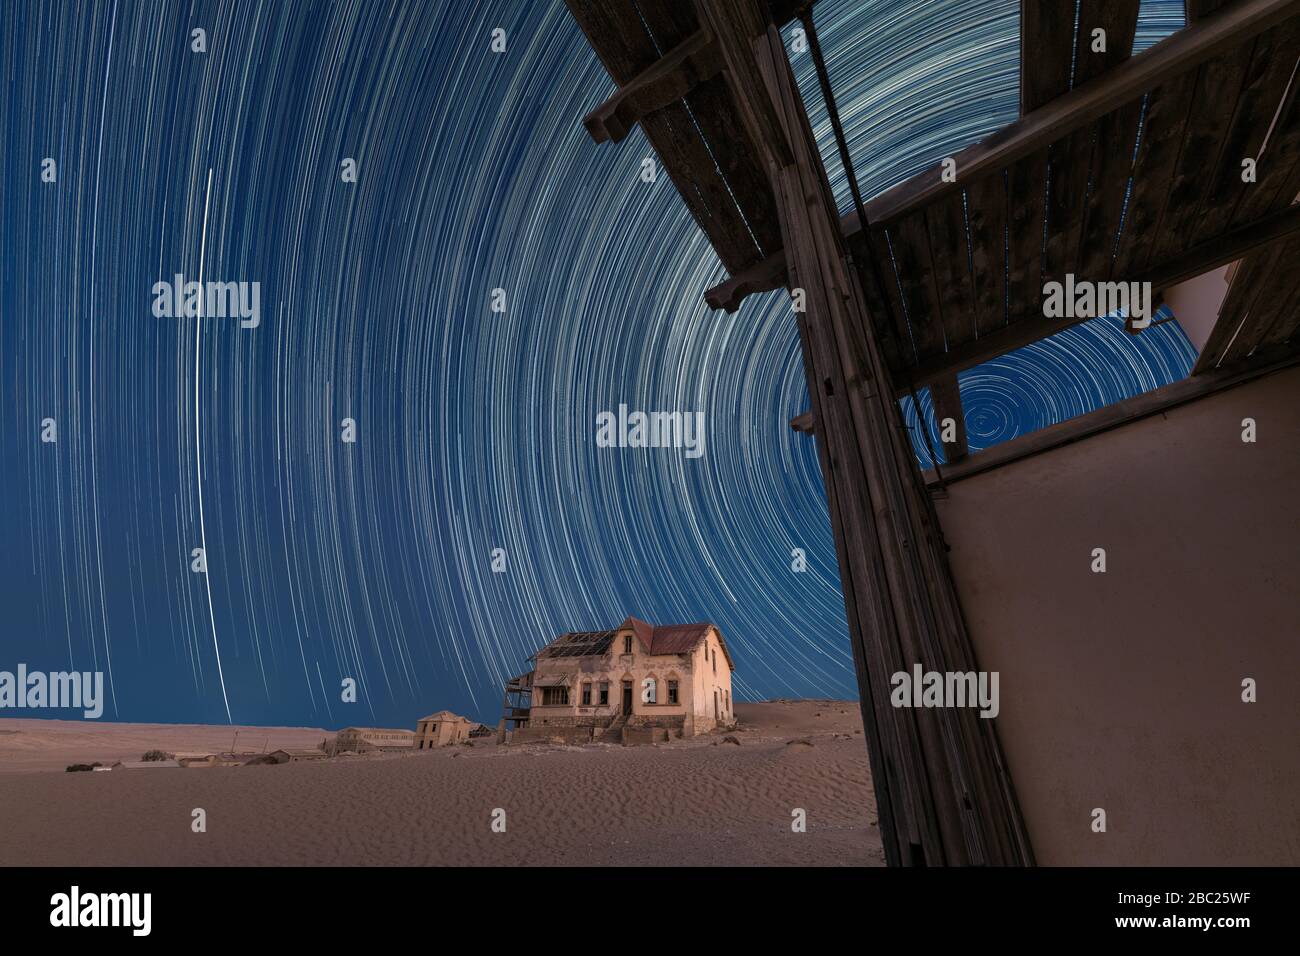 A beautiful night sky photograph with circular star trails against a deep blue sky, with an abandoned house and desert sand in the background, taken i Stock Photo